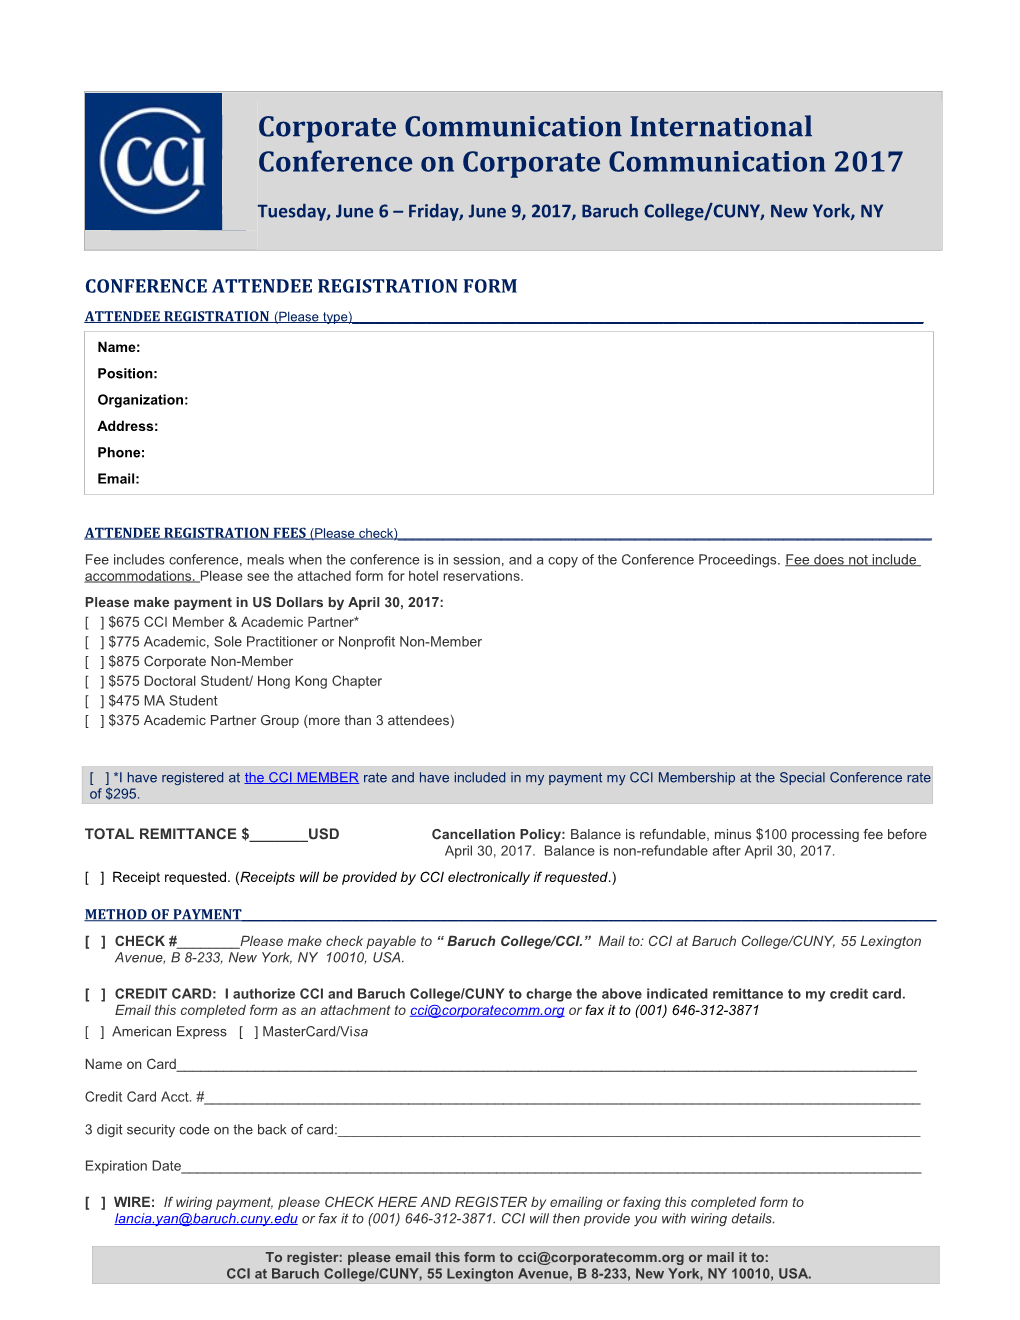 Conference Attendee Registration Form